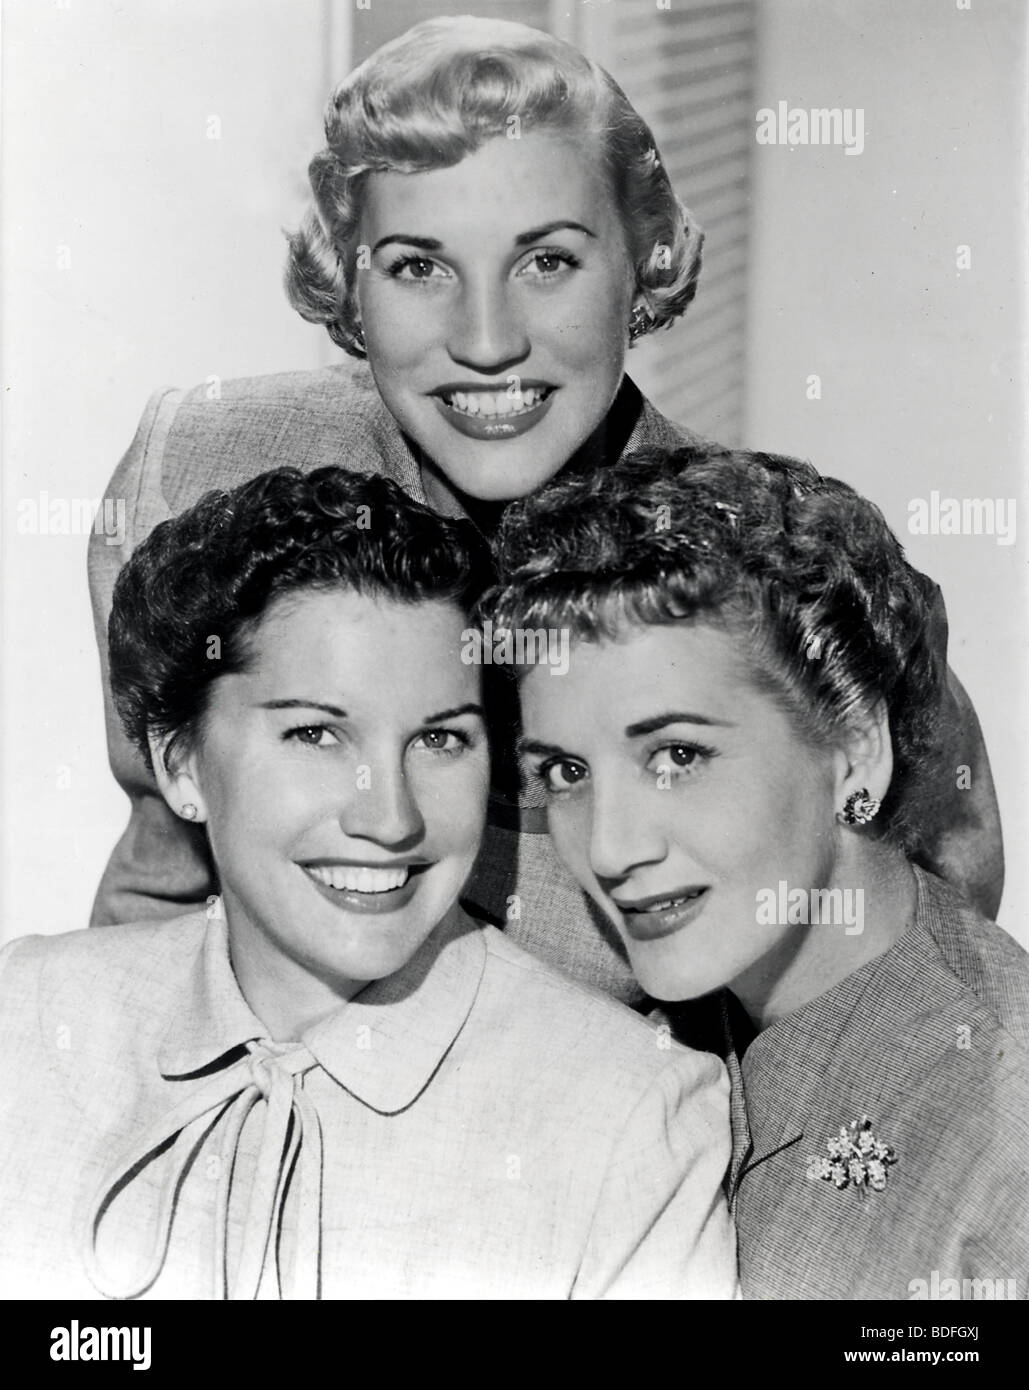 ANDREWS SISTERS - US vocal trio from left Maxene, Patty and LaVerne Stock Photo